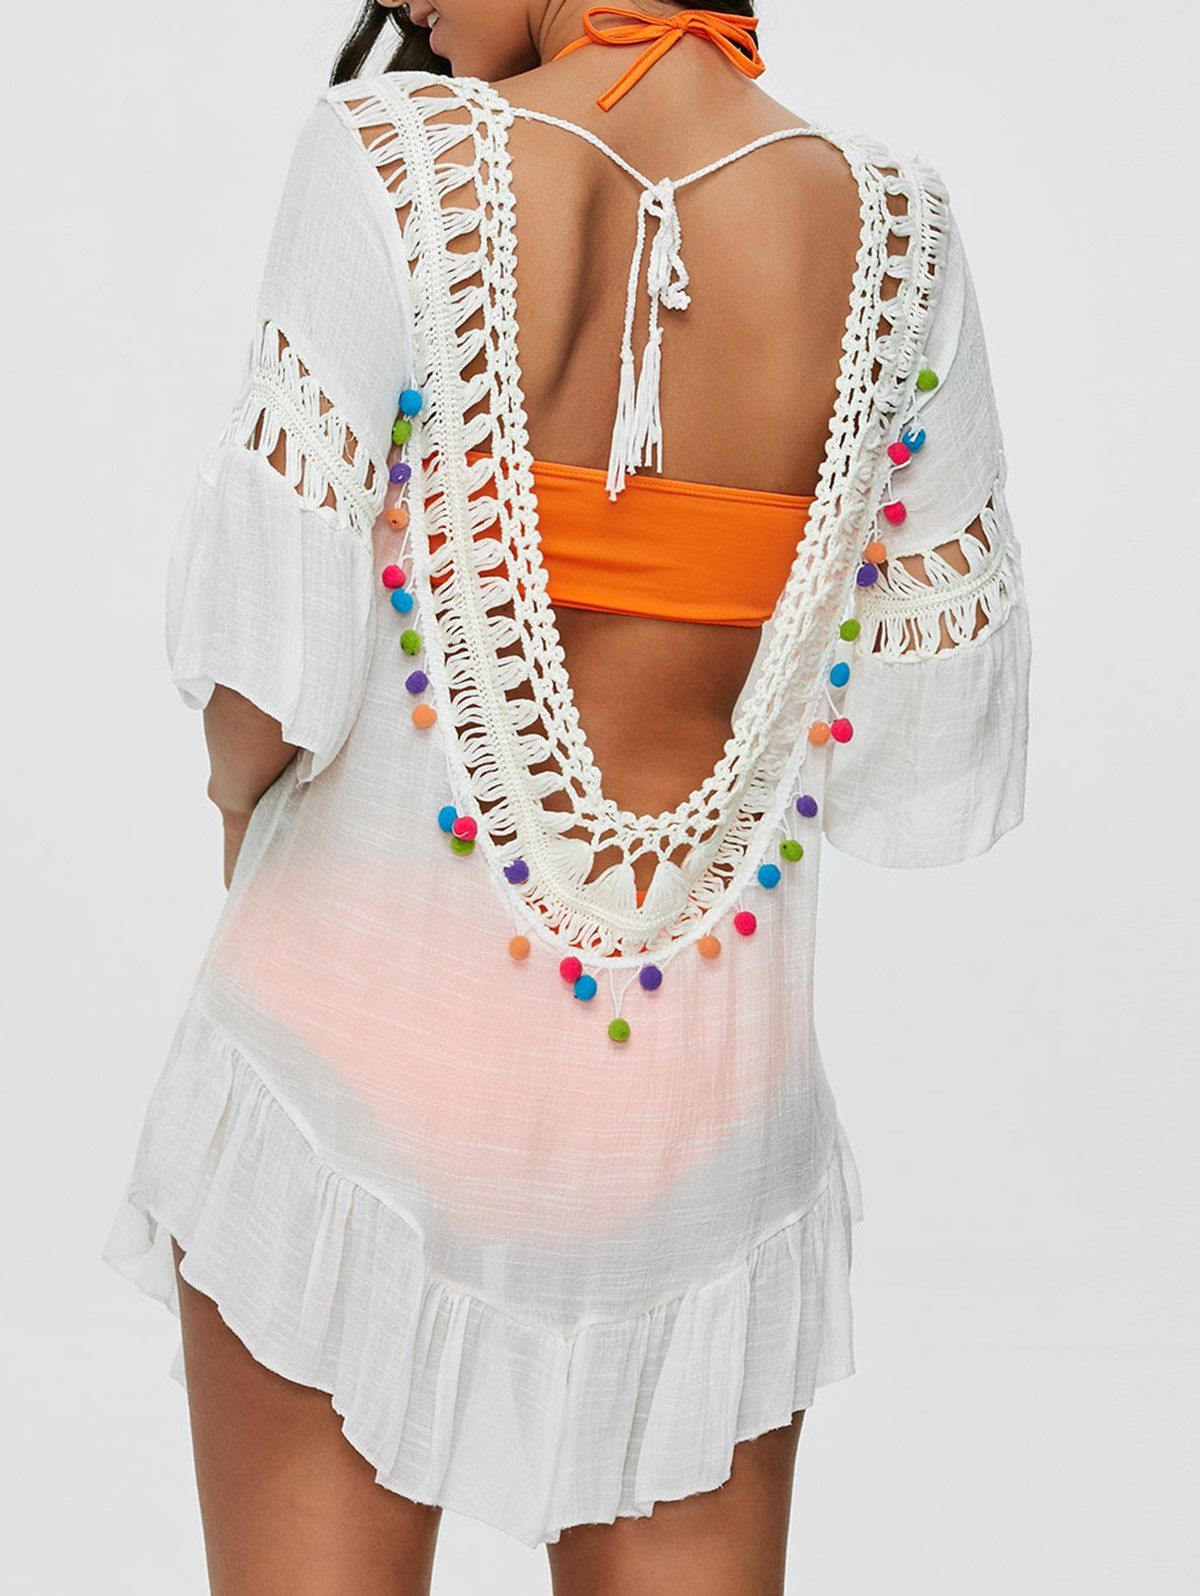 Pompon See-Through Crochet Tunic Beach Cover Up - WHITE ONE SIZE